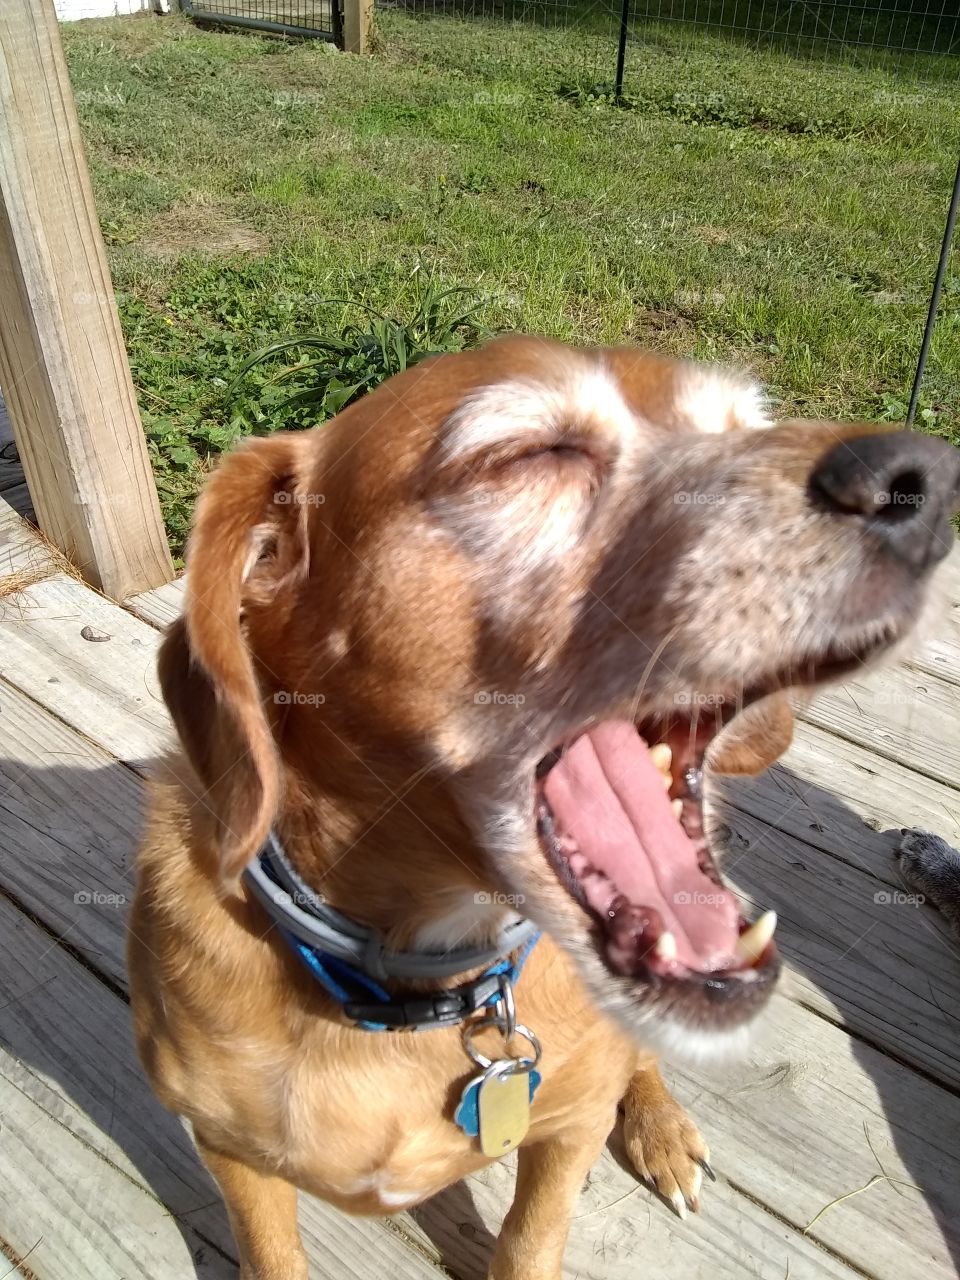 He was caught yawning, but looks like he's about to eat an entire cheeseburger in one bite